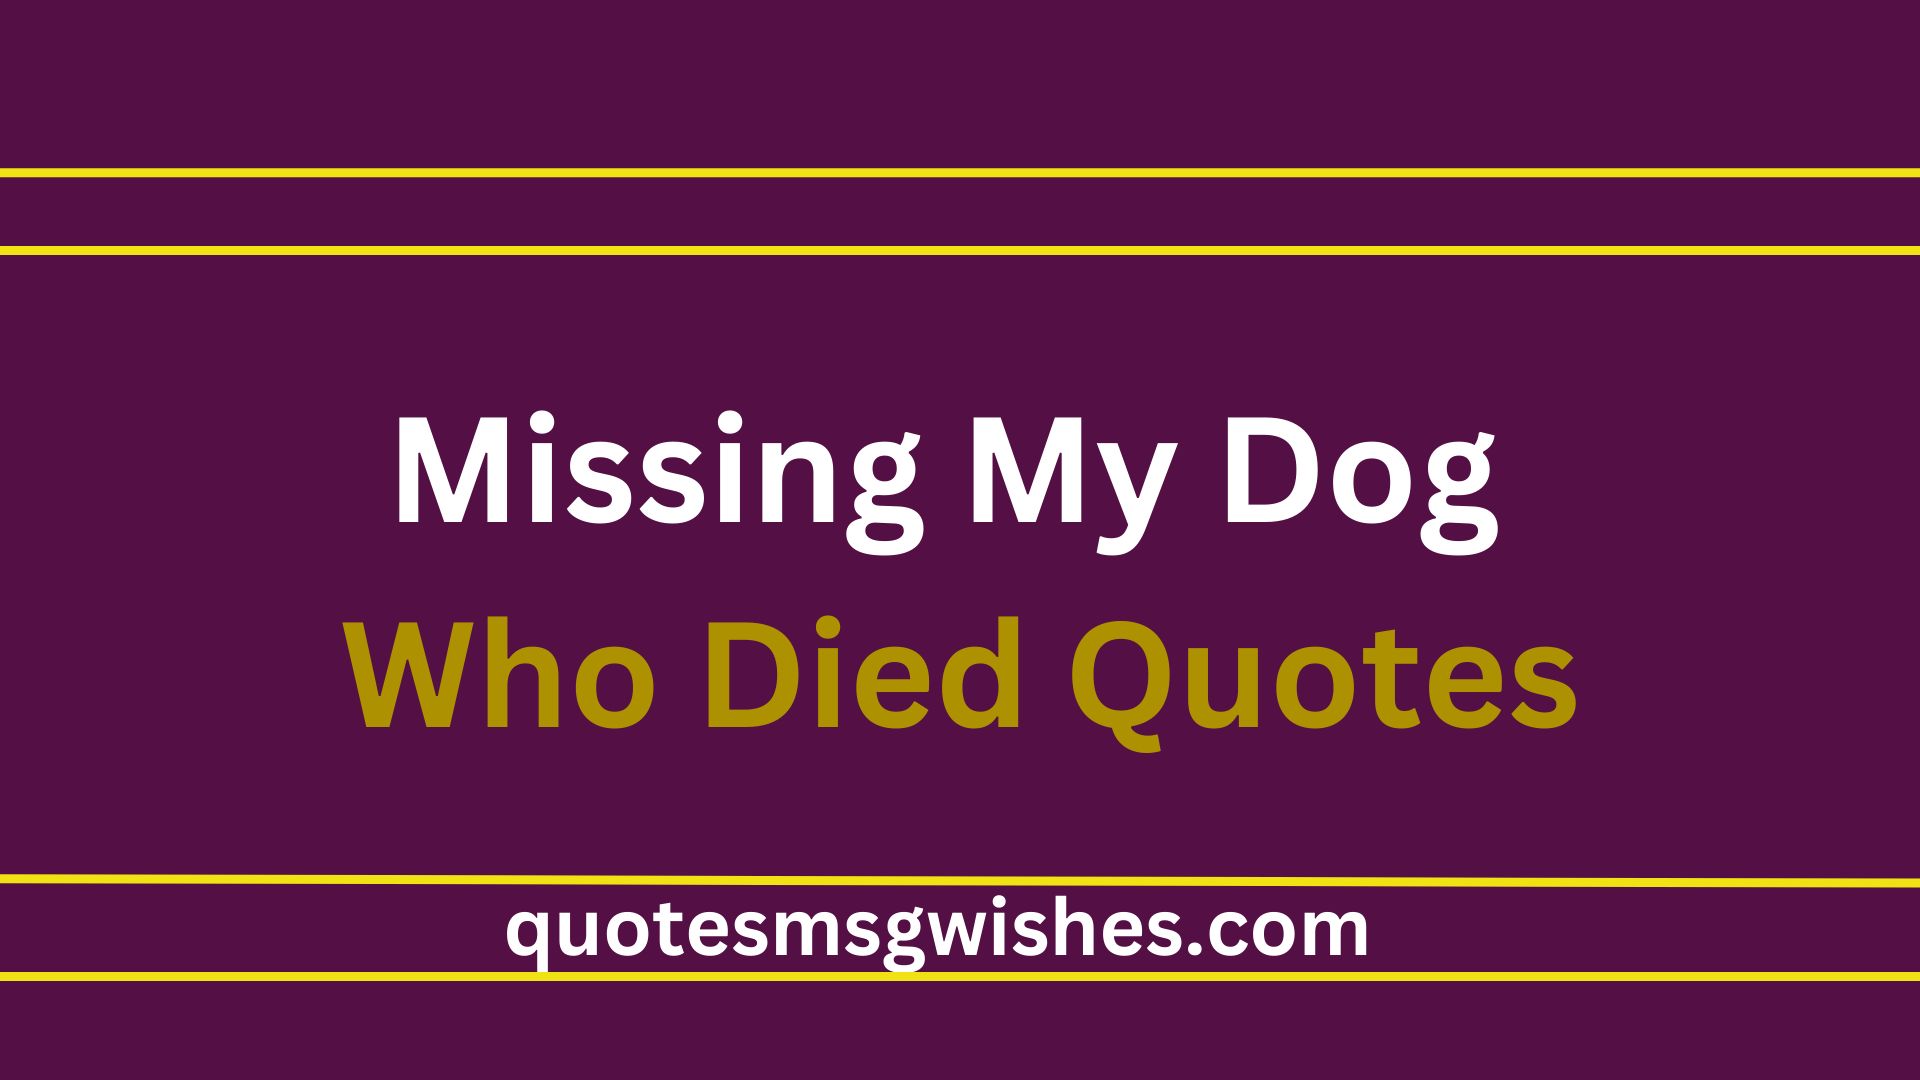 Missing My Dog Who Died Quotes